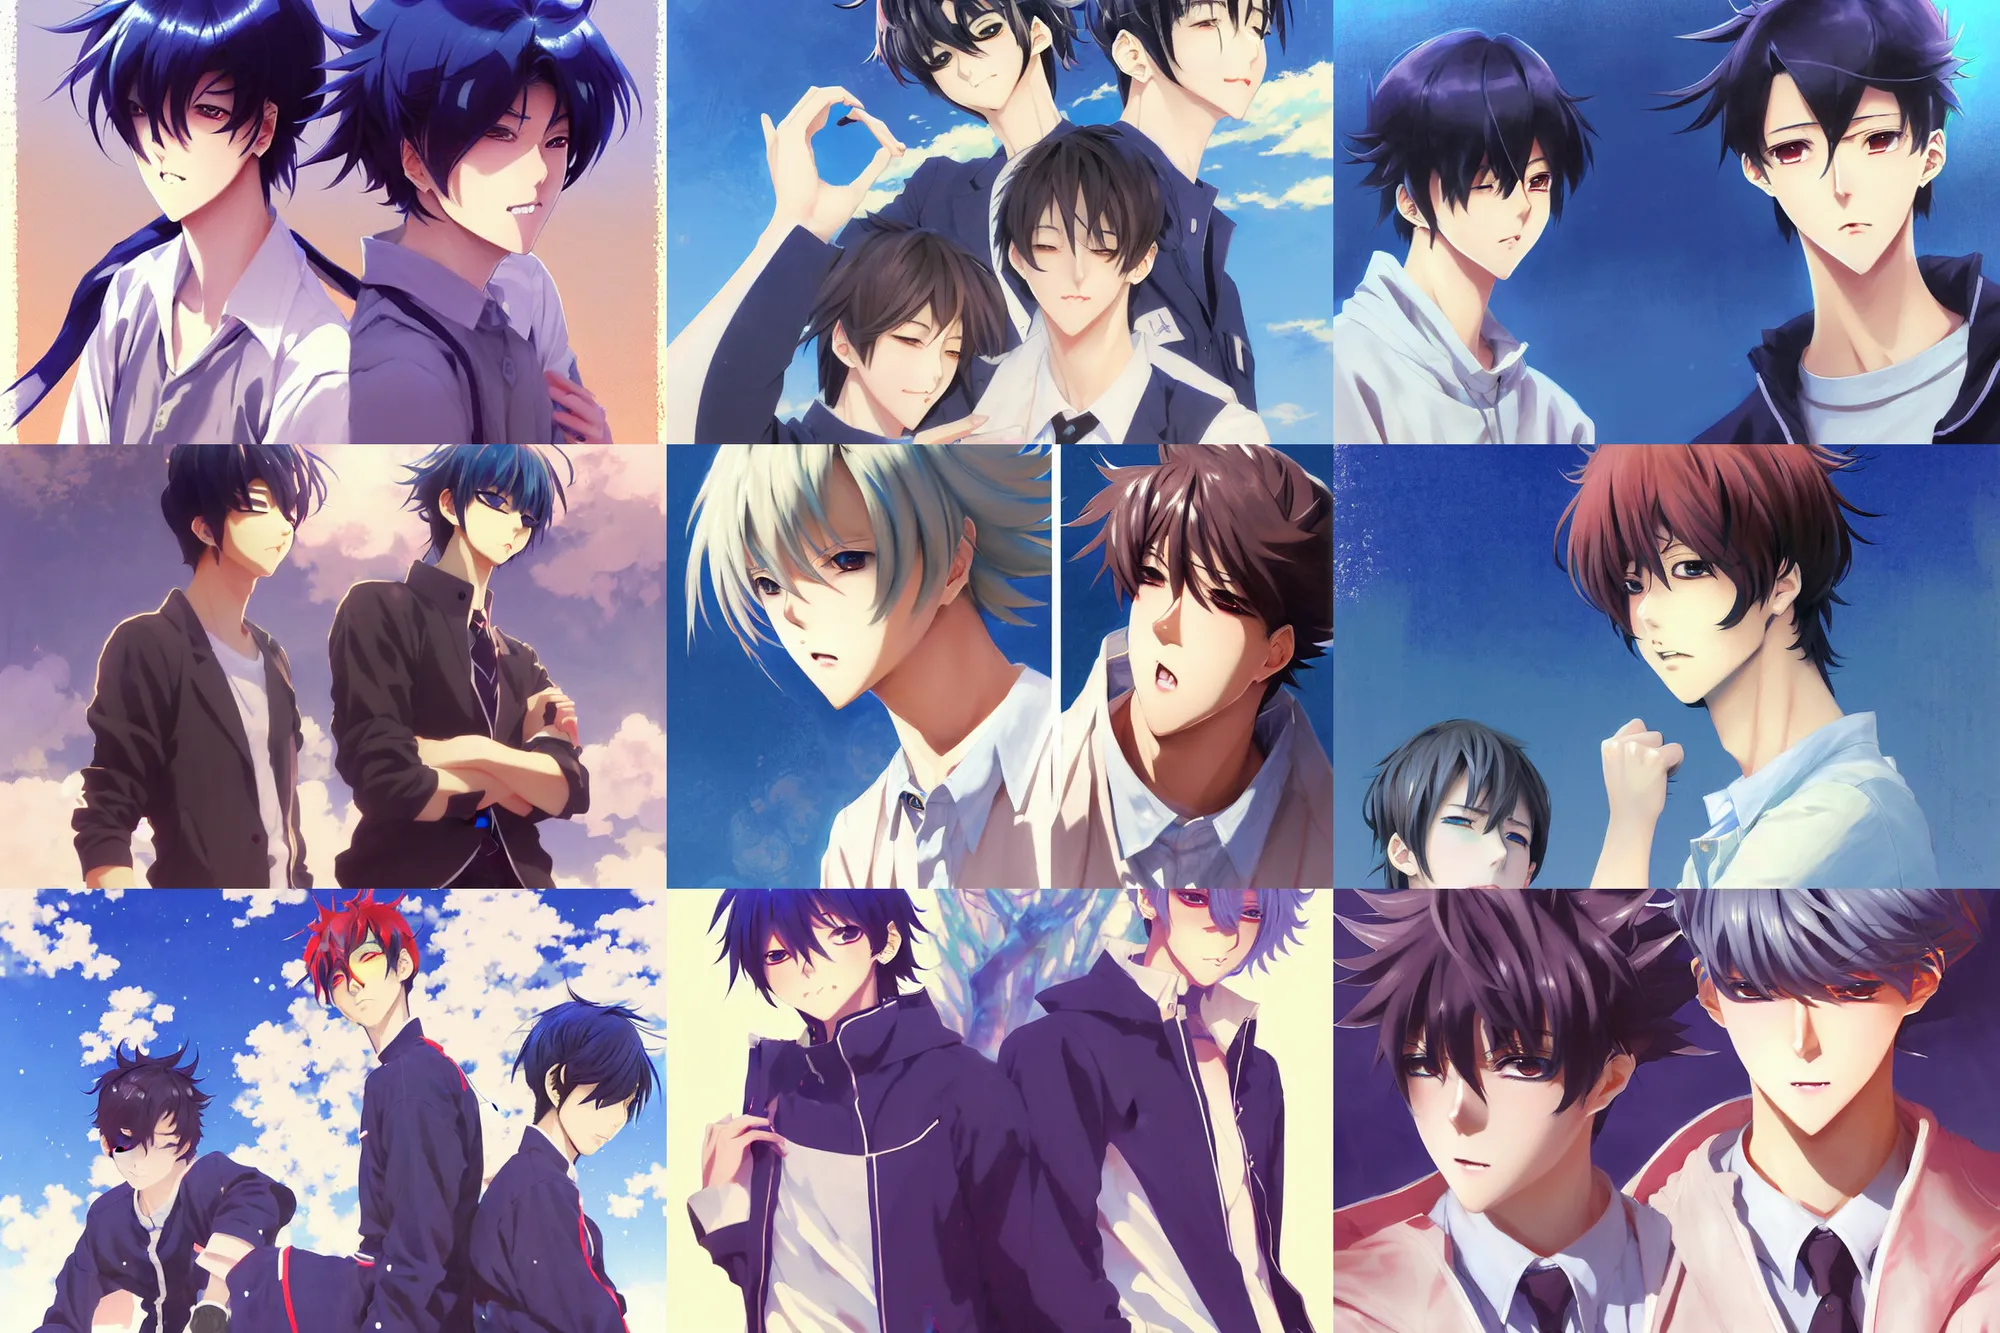 Prompt: boy's love anime high school noon, high detail concept art, perfect proportions fine face, athletic tall handsome guys, close together romantic undertones, playful interaction, avant designer uniform, vivid colors, realistic shaded lighting poster fantasy art kazue kato, katsuhiro, jeremy lipking and michael germash, makoto shinkai, loish and clamp style, best selling artist